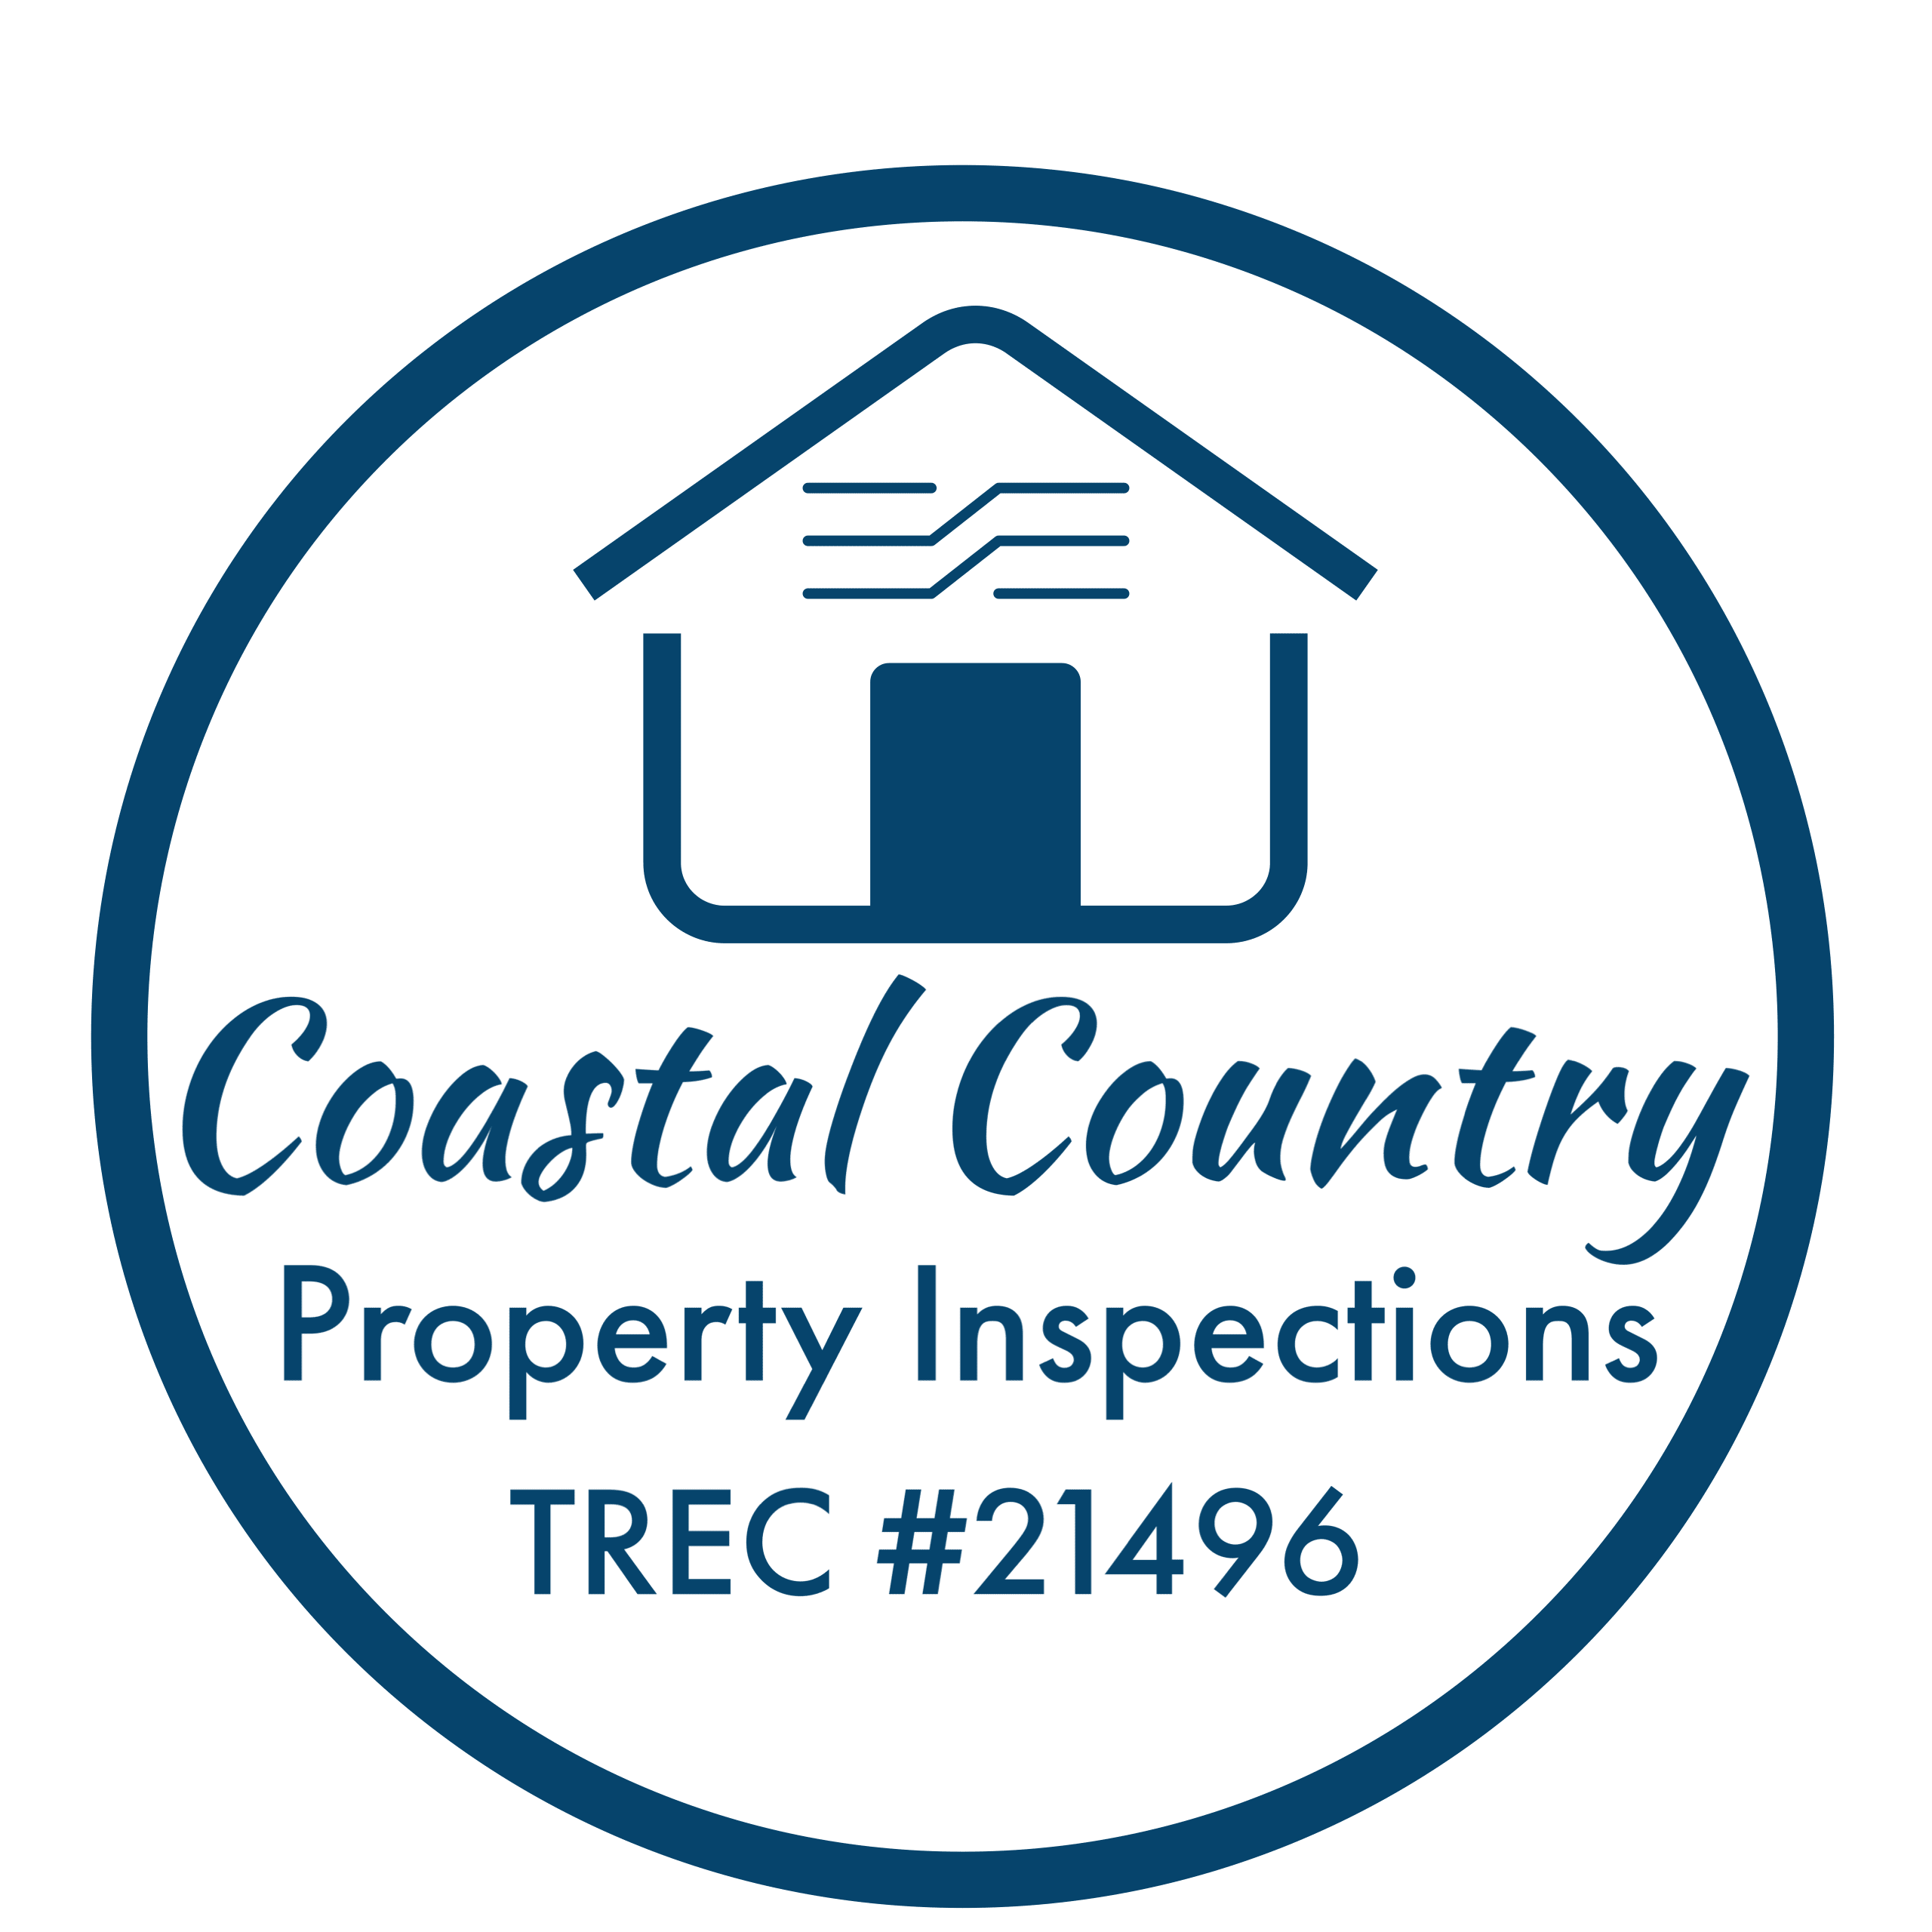 Coastal Country Property Inspections Logo